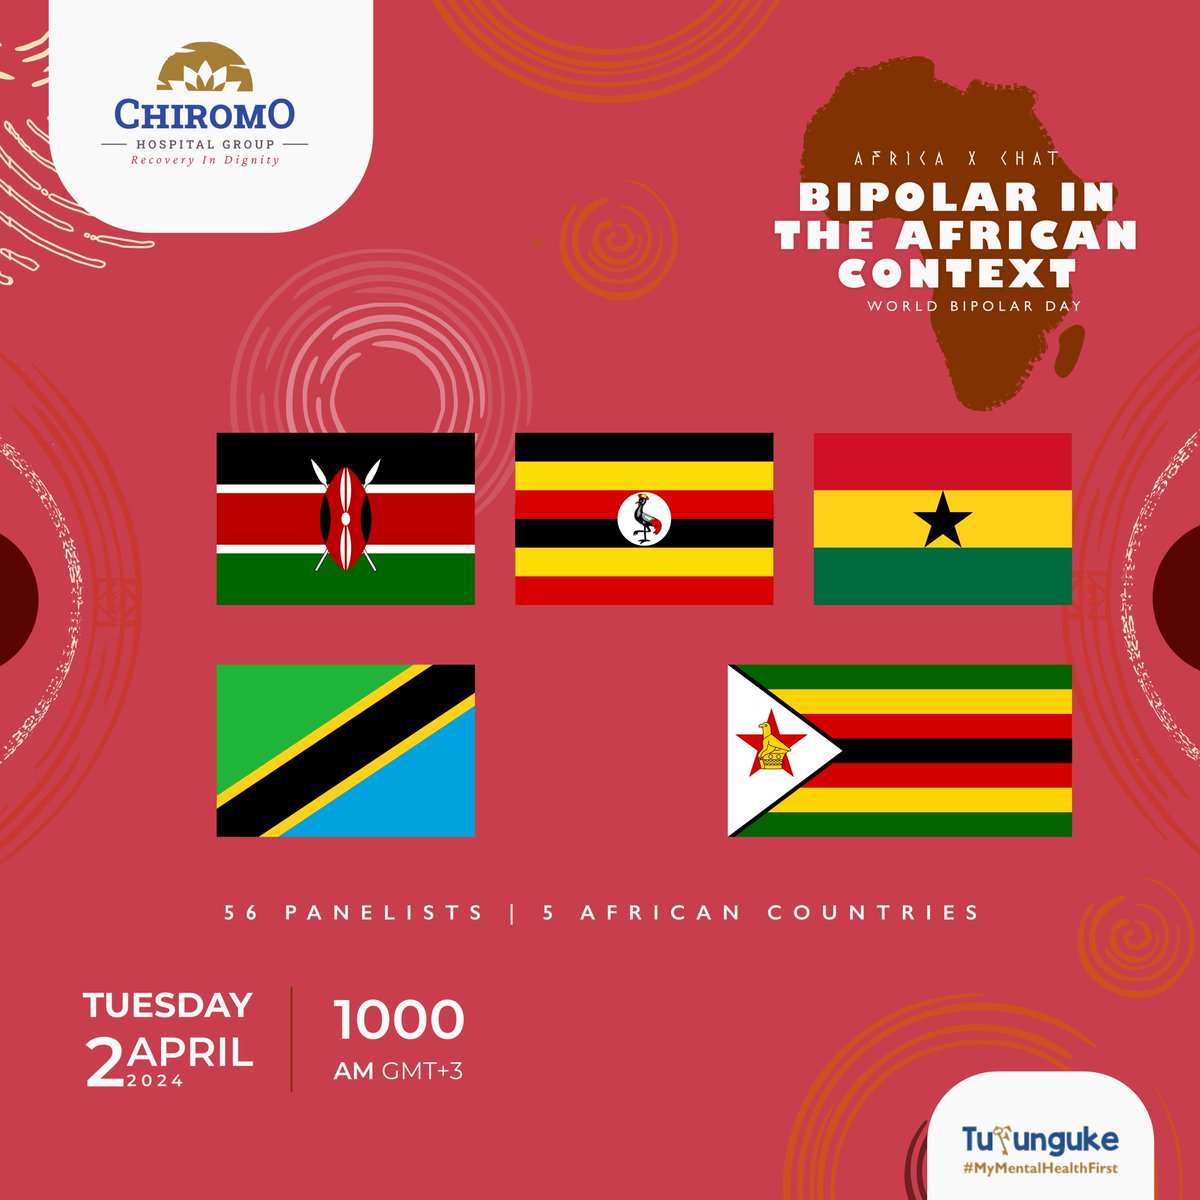 Just 1 day to go! Tomorrow, we have an amazing conversation on Bipolar in the African context with participants from 5 different countries. Tune in on our X page @chiromohospgrp to catch the conversation. #Tufunguke about #bipolar